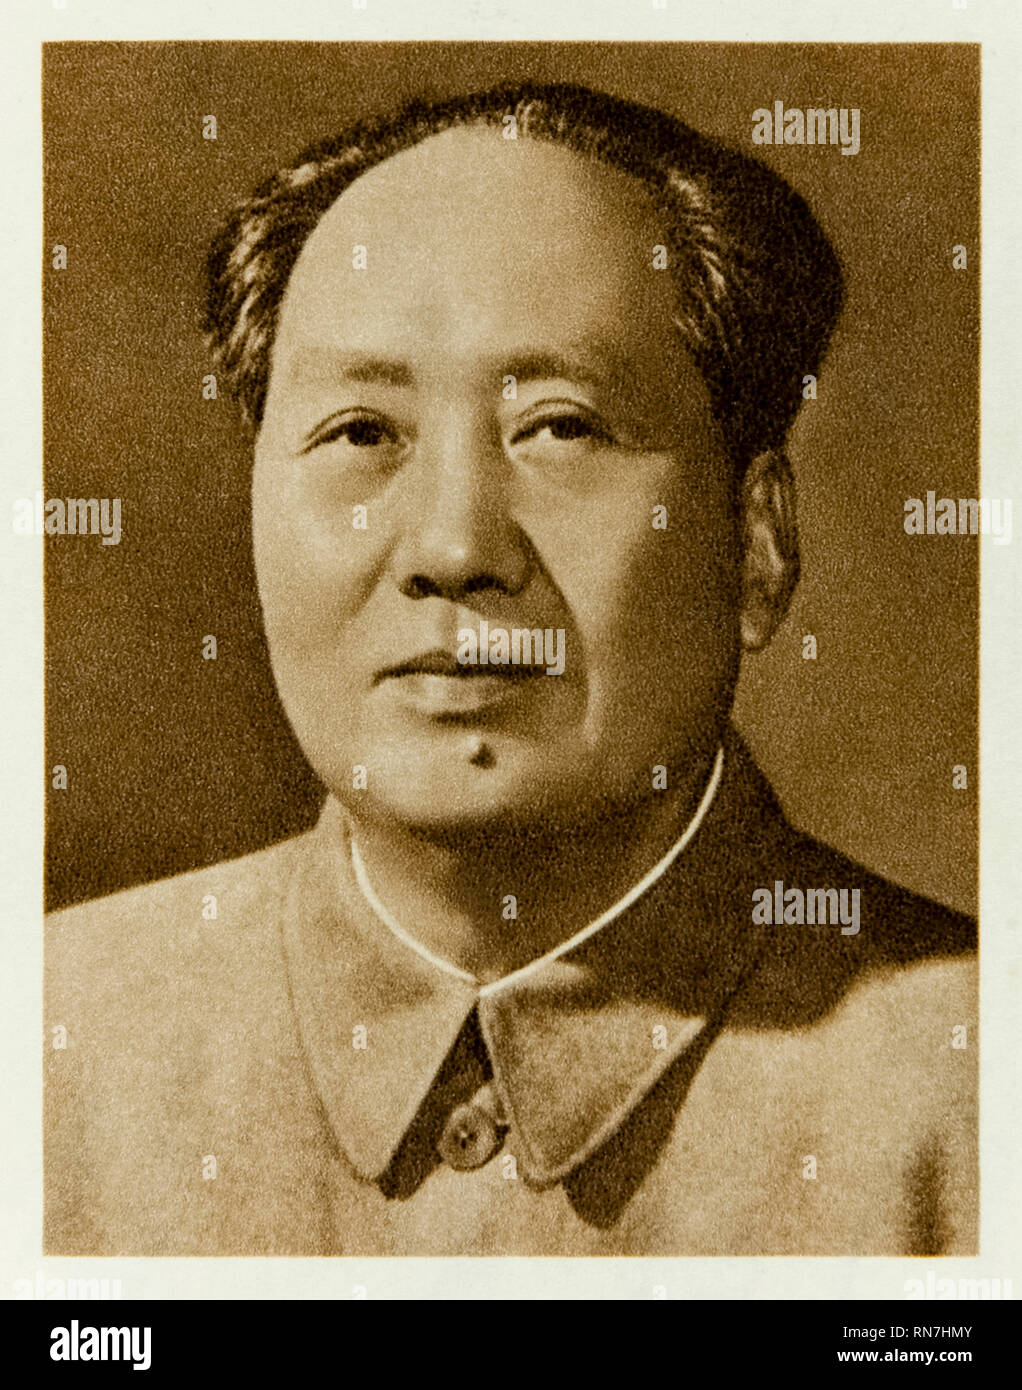 Portrait of Chairman Mao from ‘The Little Red Book’ (Quotations from Chairman Mao Tse-tung) containing statements made by the founding father of the People's Republic of China, photograph from first edition published in 1964. Stock Photo